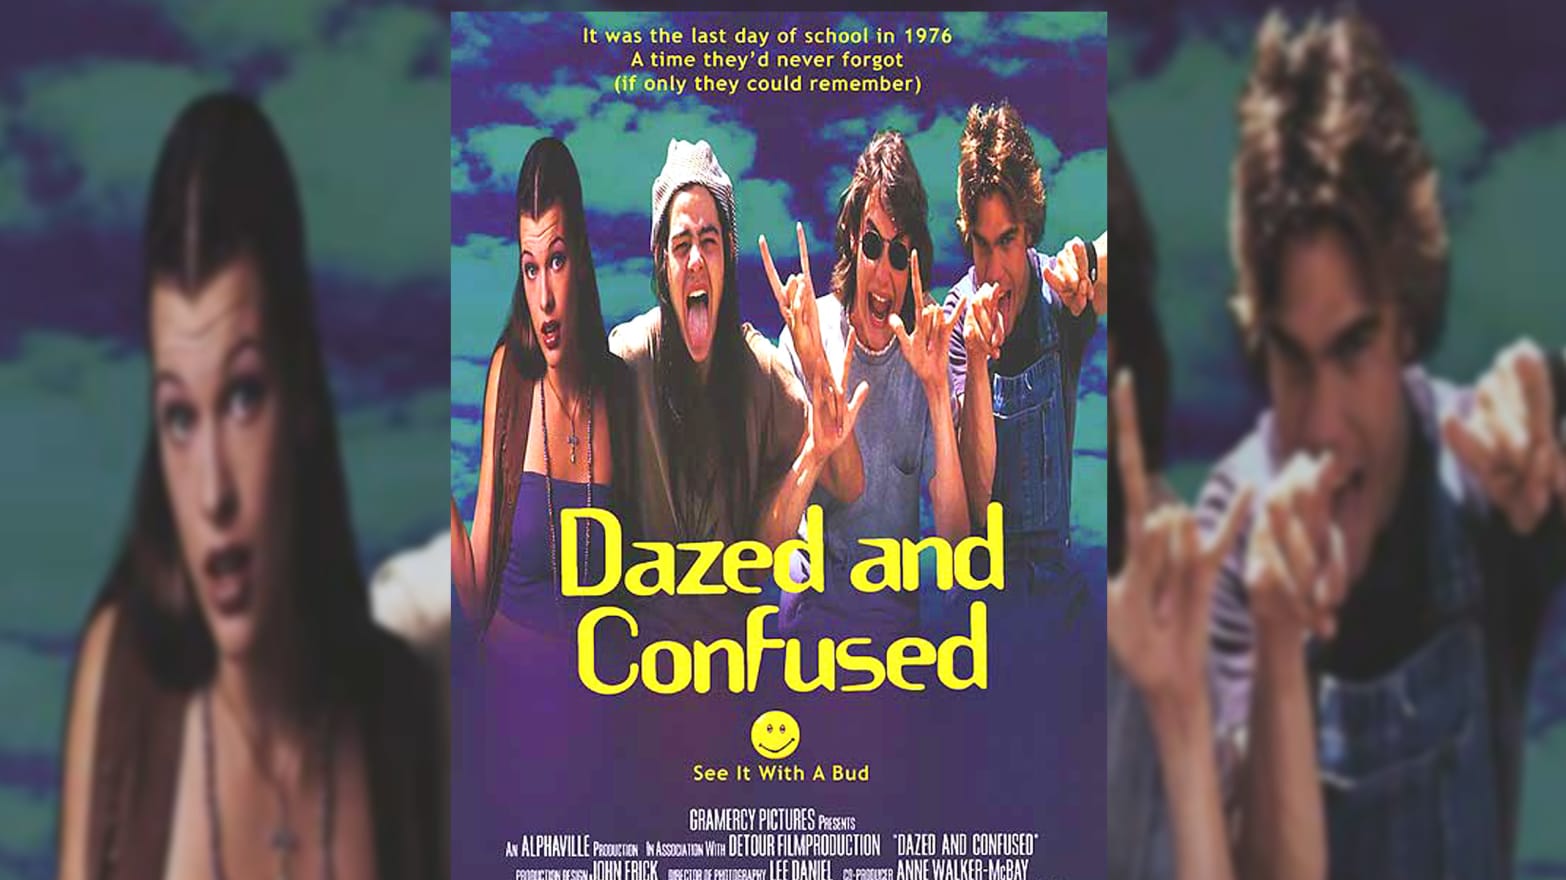 Dazed And Confused th Anniversary Craziest Facts About The Cult Classic